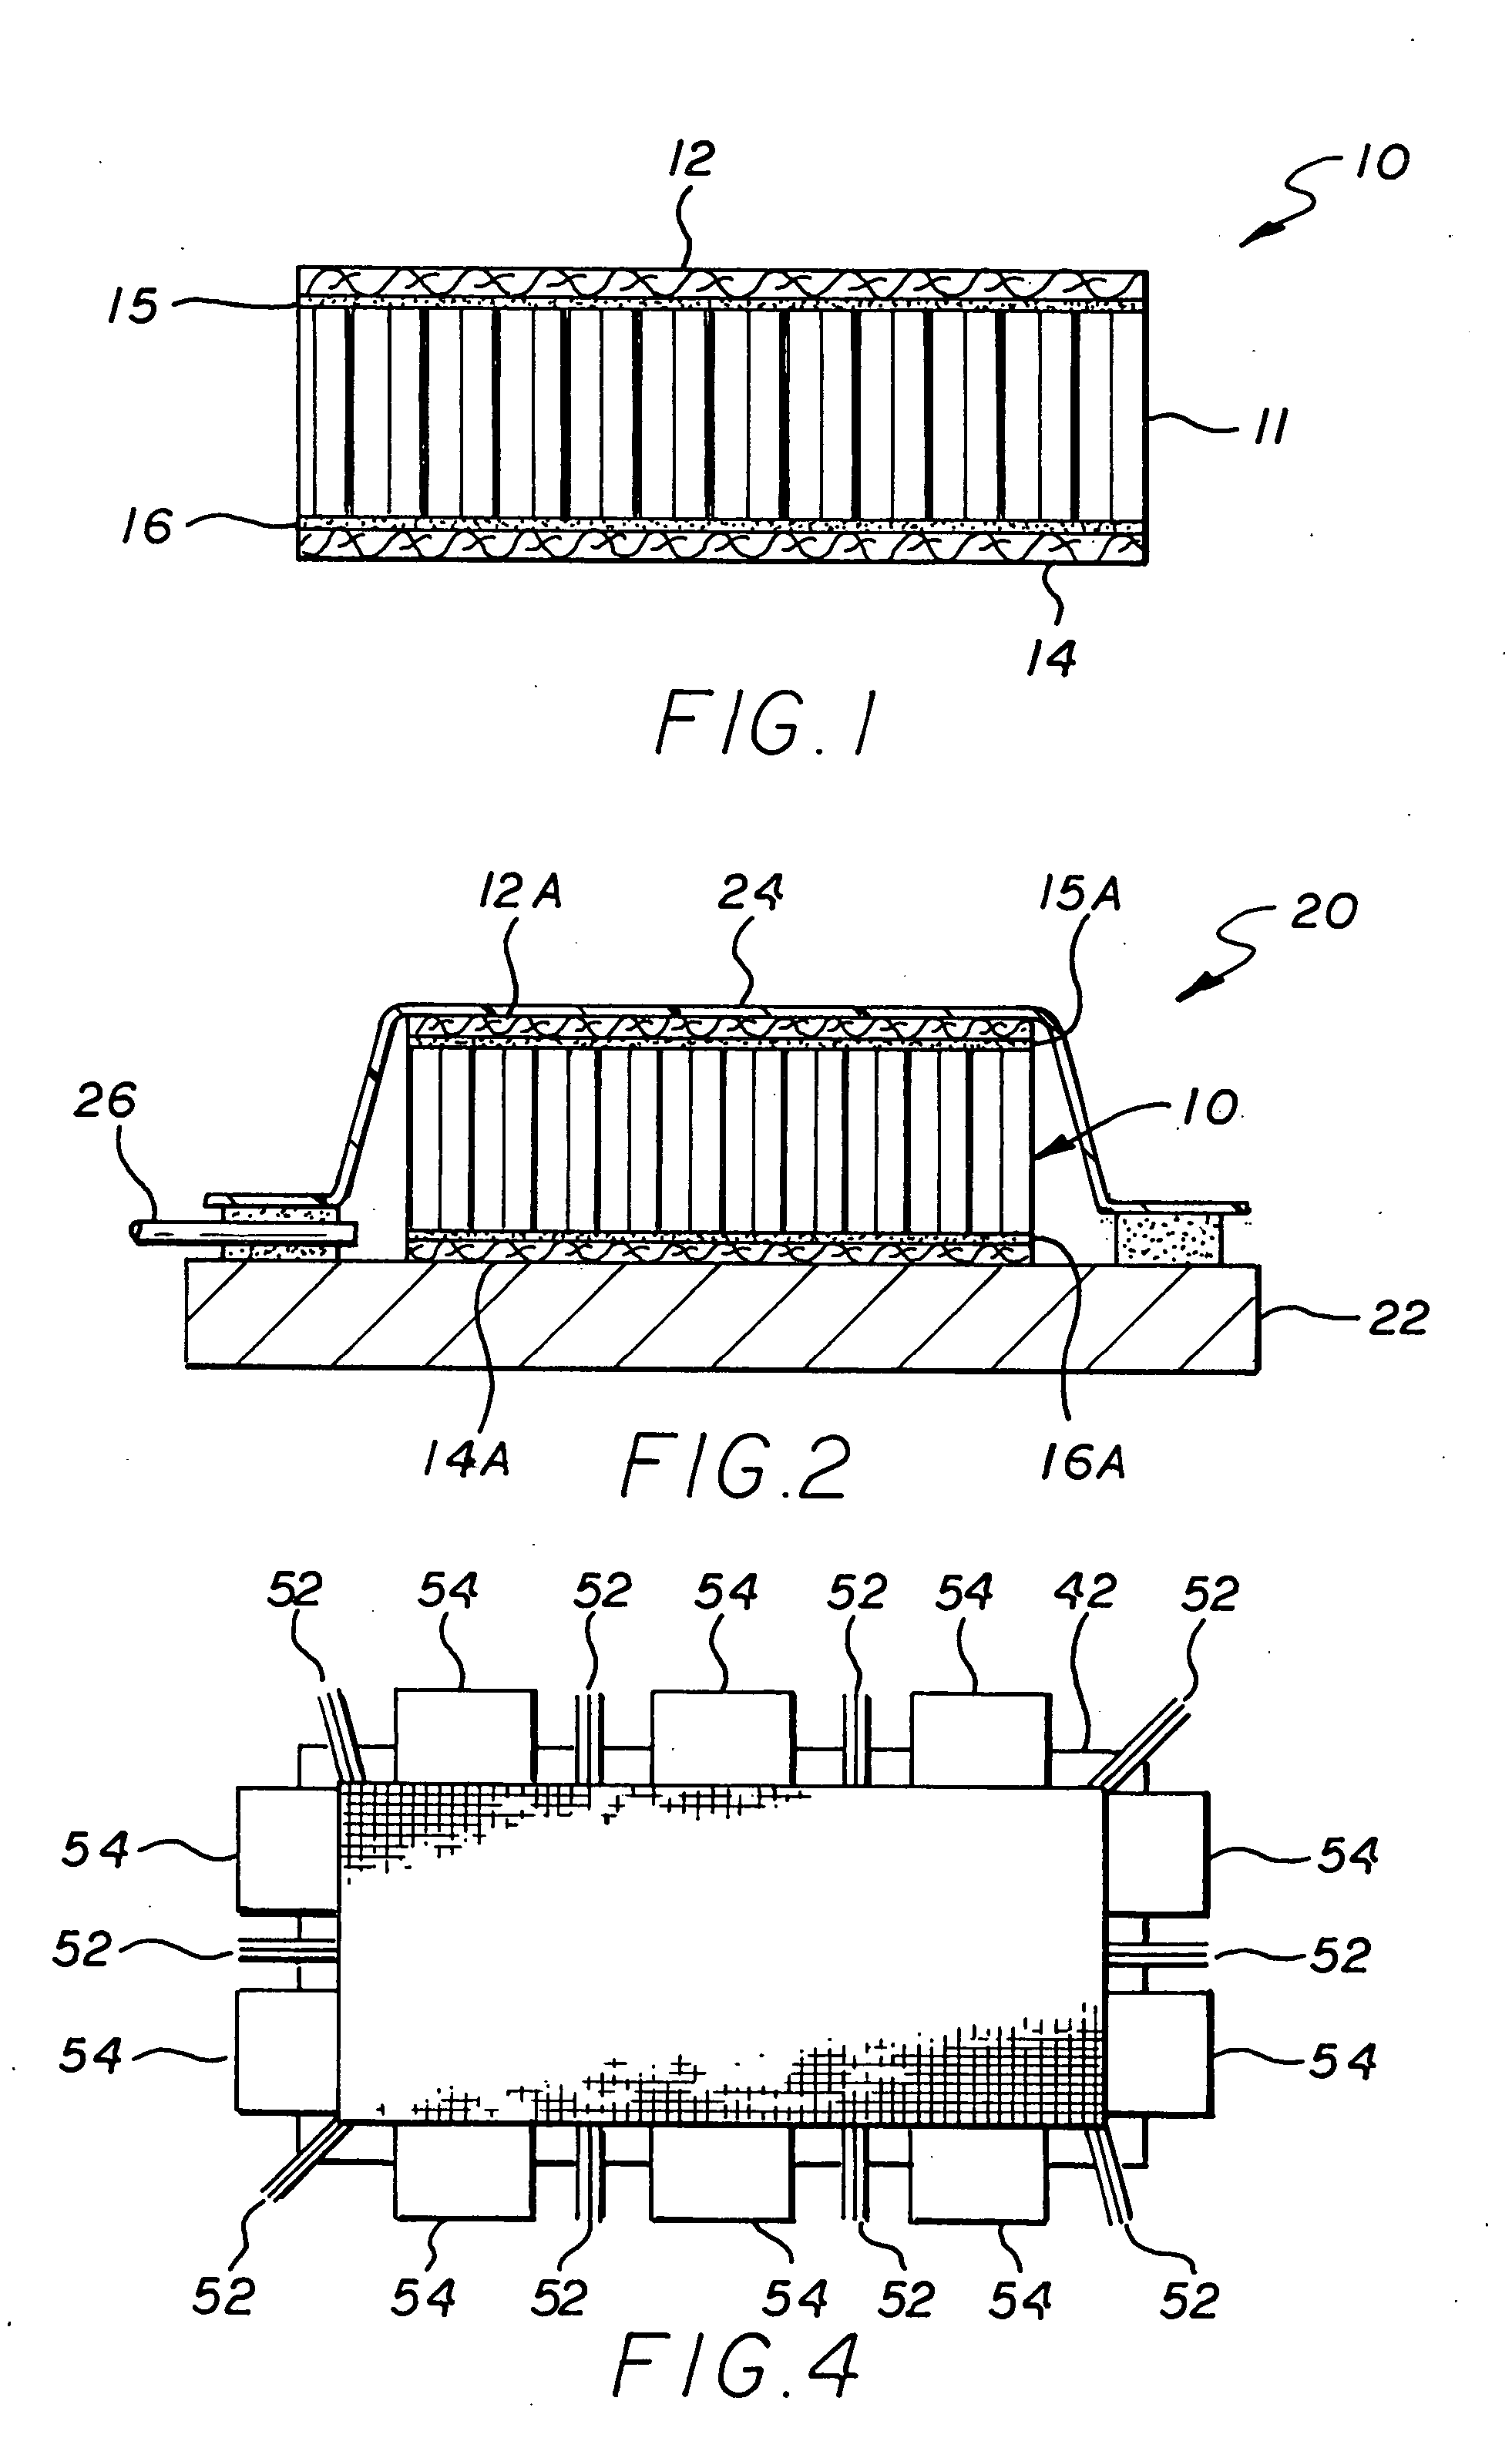 Process for the manufacture of composite structures